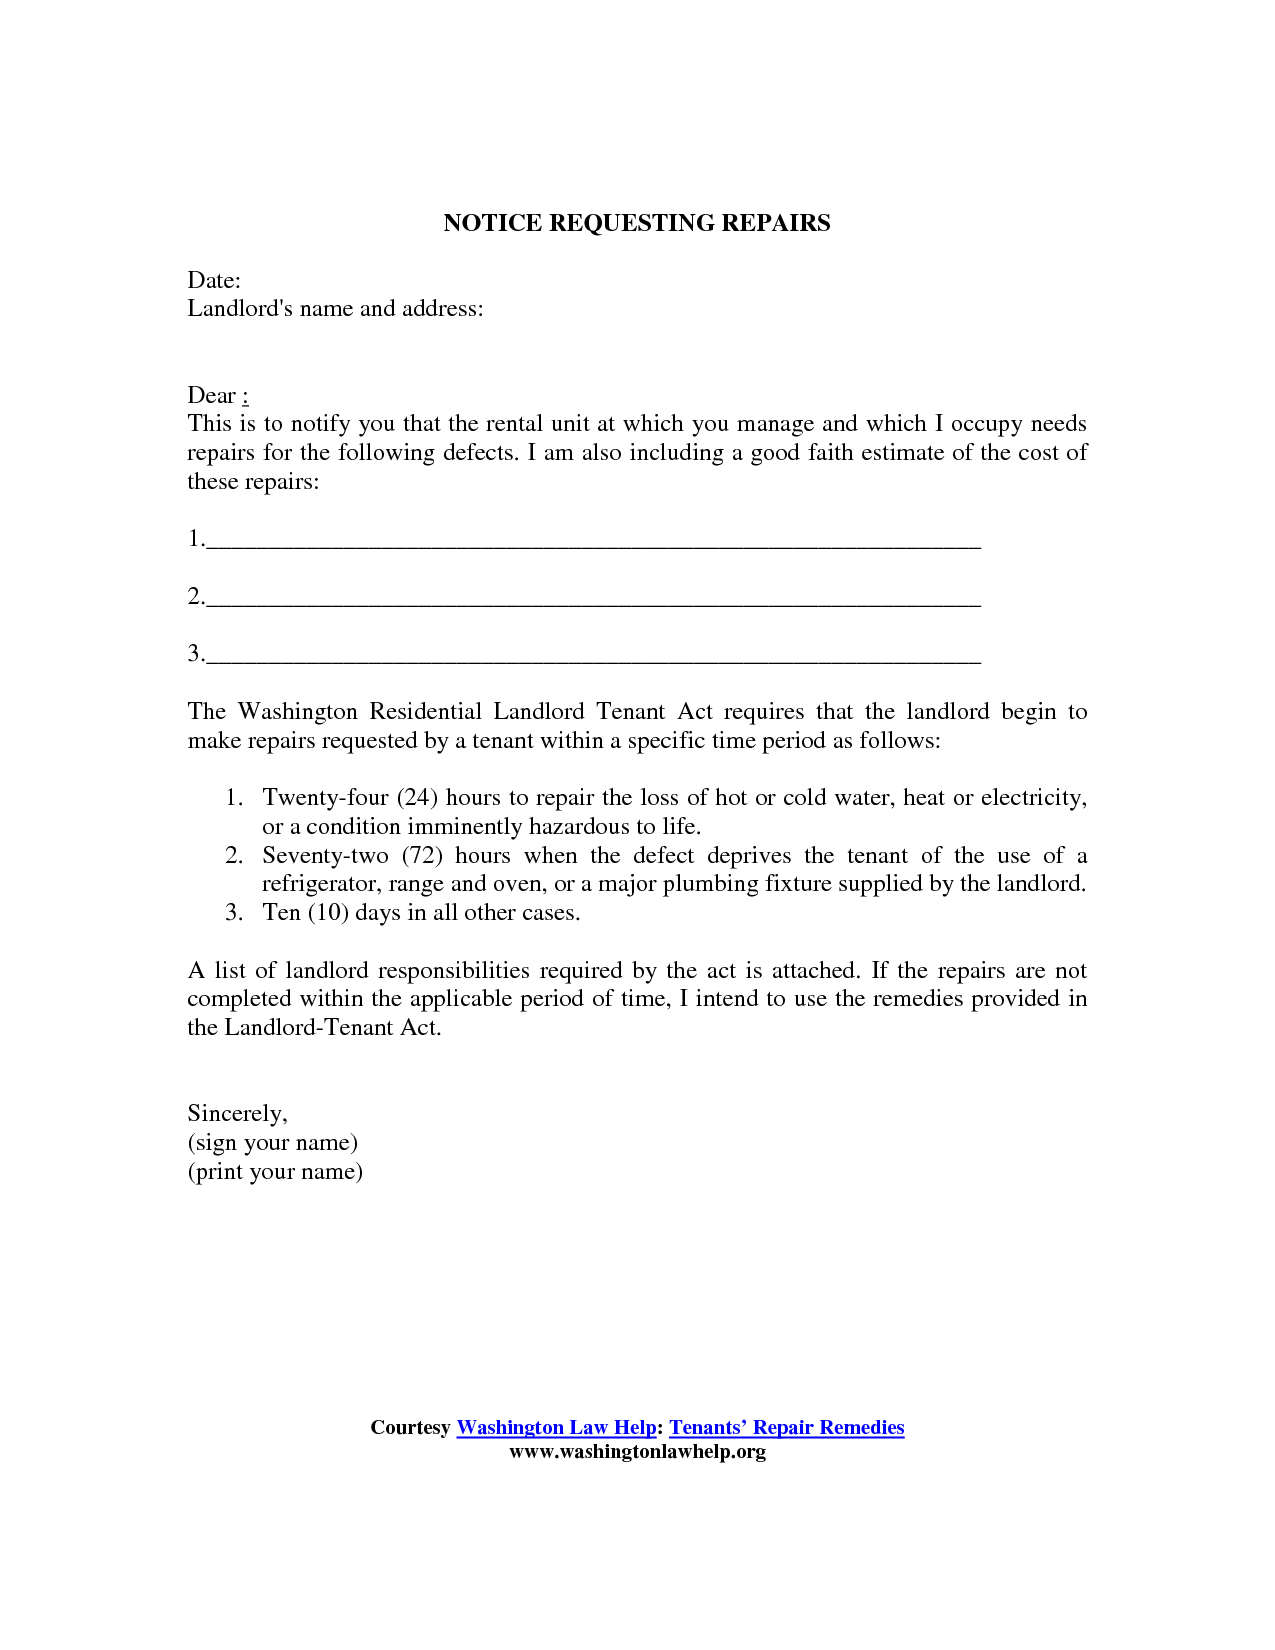 Tenant Warning Letter Template - Best S Tenant Notice Letter for Repairs Inspection Intent to